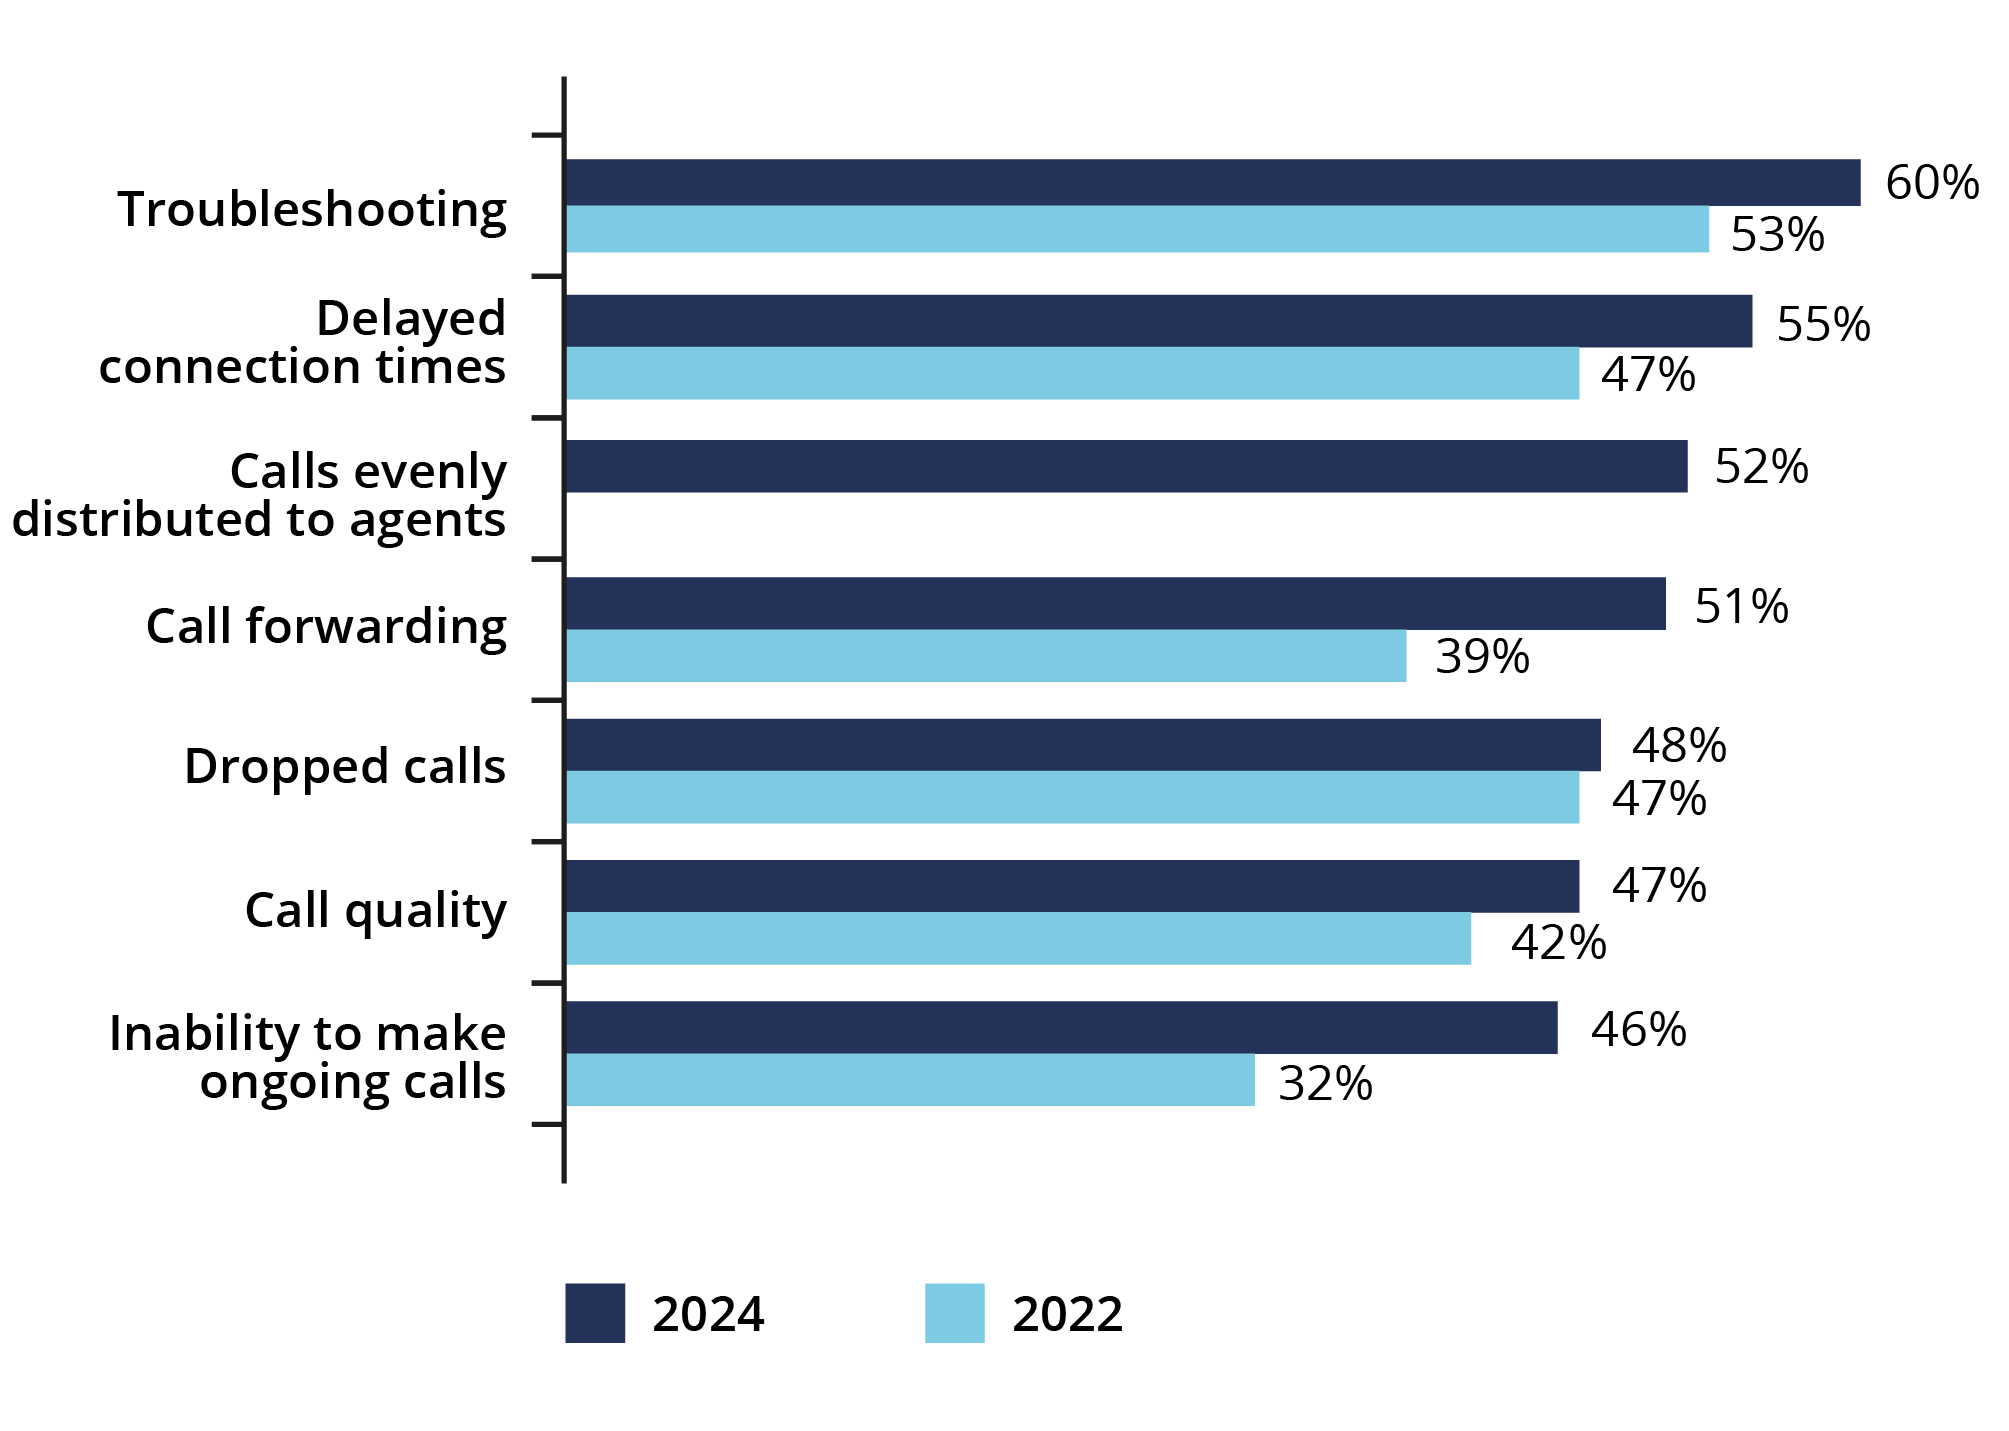 Bar Chart 2022 & 2024 showing types of performance issues experienced by contact center personnel